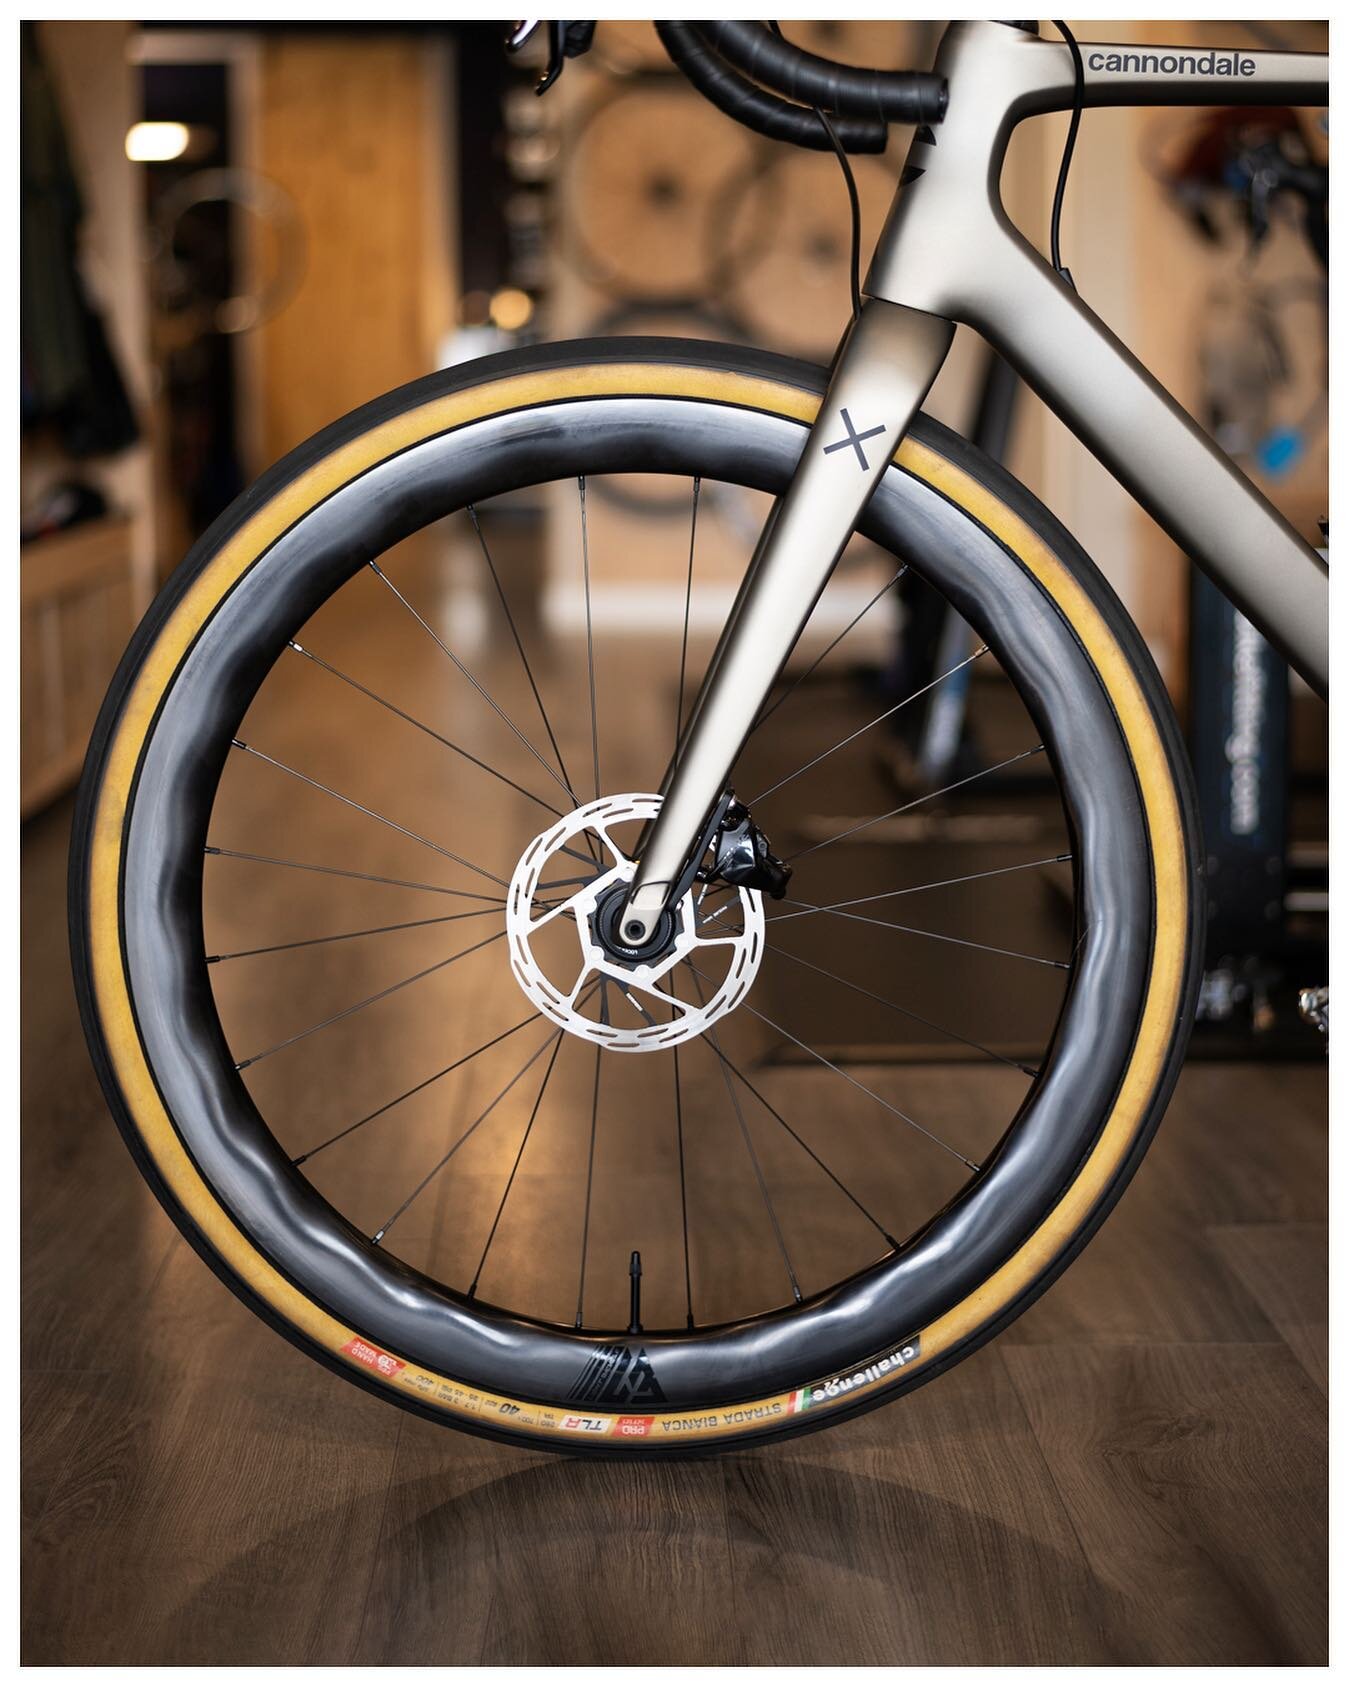 The @lightbicycle AR465 rim is pretty high on the list of things we ❤️ right now. These are laced to the gold @industry_nine hubs we featured a few days ago, for a completed wheelset that successfully balances fast road rides and gravel adventures. #